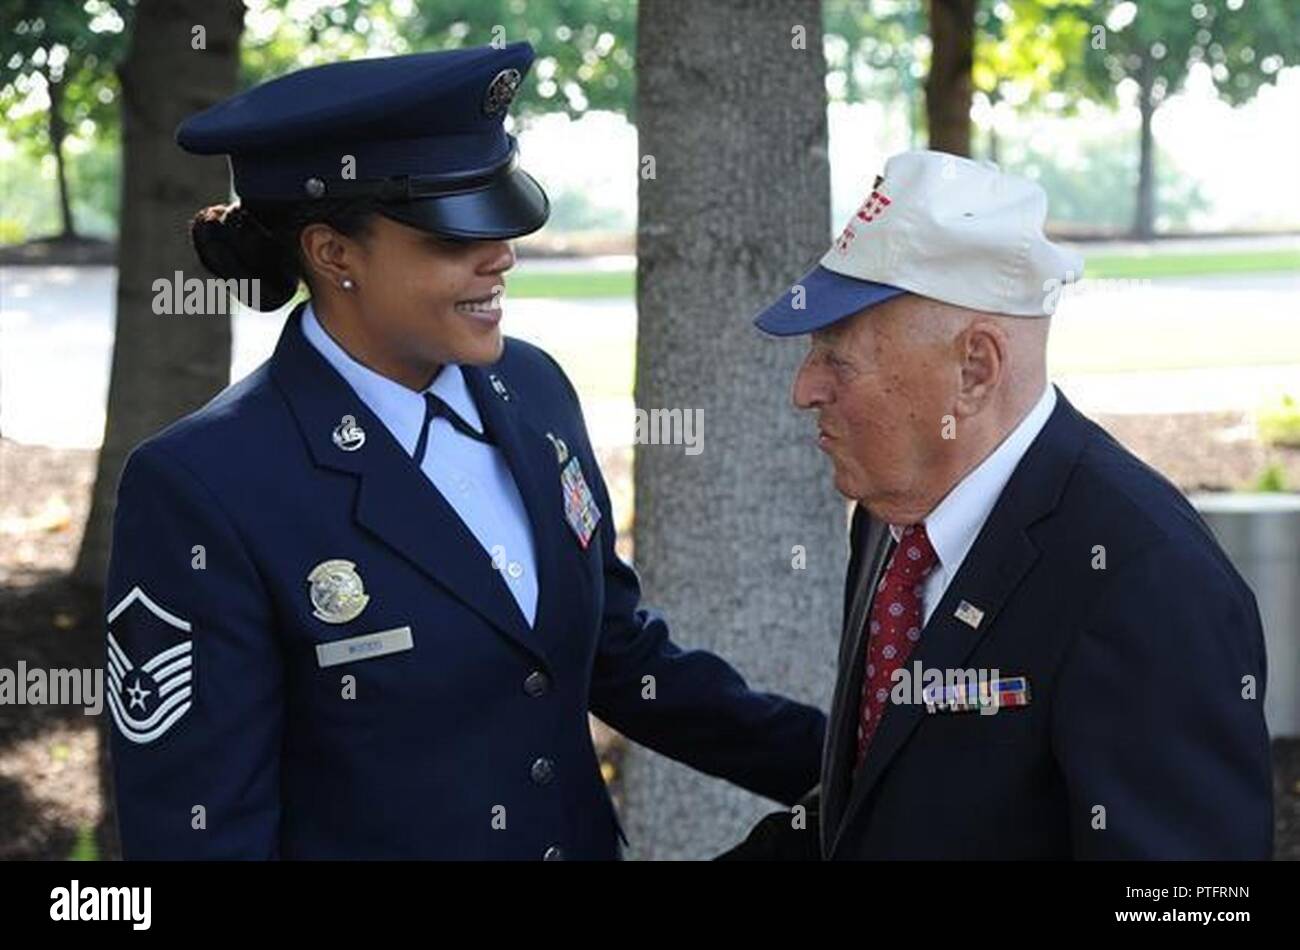 Master Sgt. Tamekia Wood, U.S.Air Force Honor Guard, assists 2nd Lt. (Ret.) John Pedevillano before his Purple Heart award ceremony on July 14, 2017 at the U.S. Air Force Memorial, Arlington, Va. Maj. Gen. James A. Jacobson, Air Force District of Washington commander, hosted the Purple Heart award ceremony and presented the prestigious award to 2nd Lt. (Ret.) John Pedevillano for wounds he incurred during a forced march as a World War II prisoner of war in Germany. Pedevillano, a B-17 bombardier pilot, and his crew assigned to the 306th Bomb Group of the “Mighty Eighth” Air Force were shot dow Stock Photo